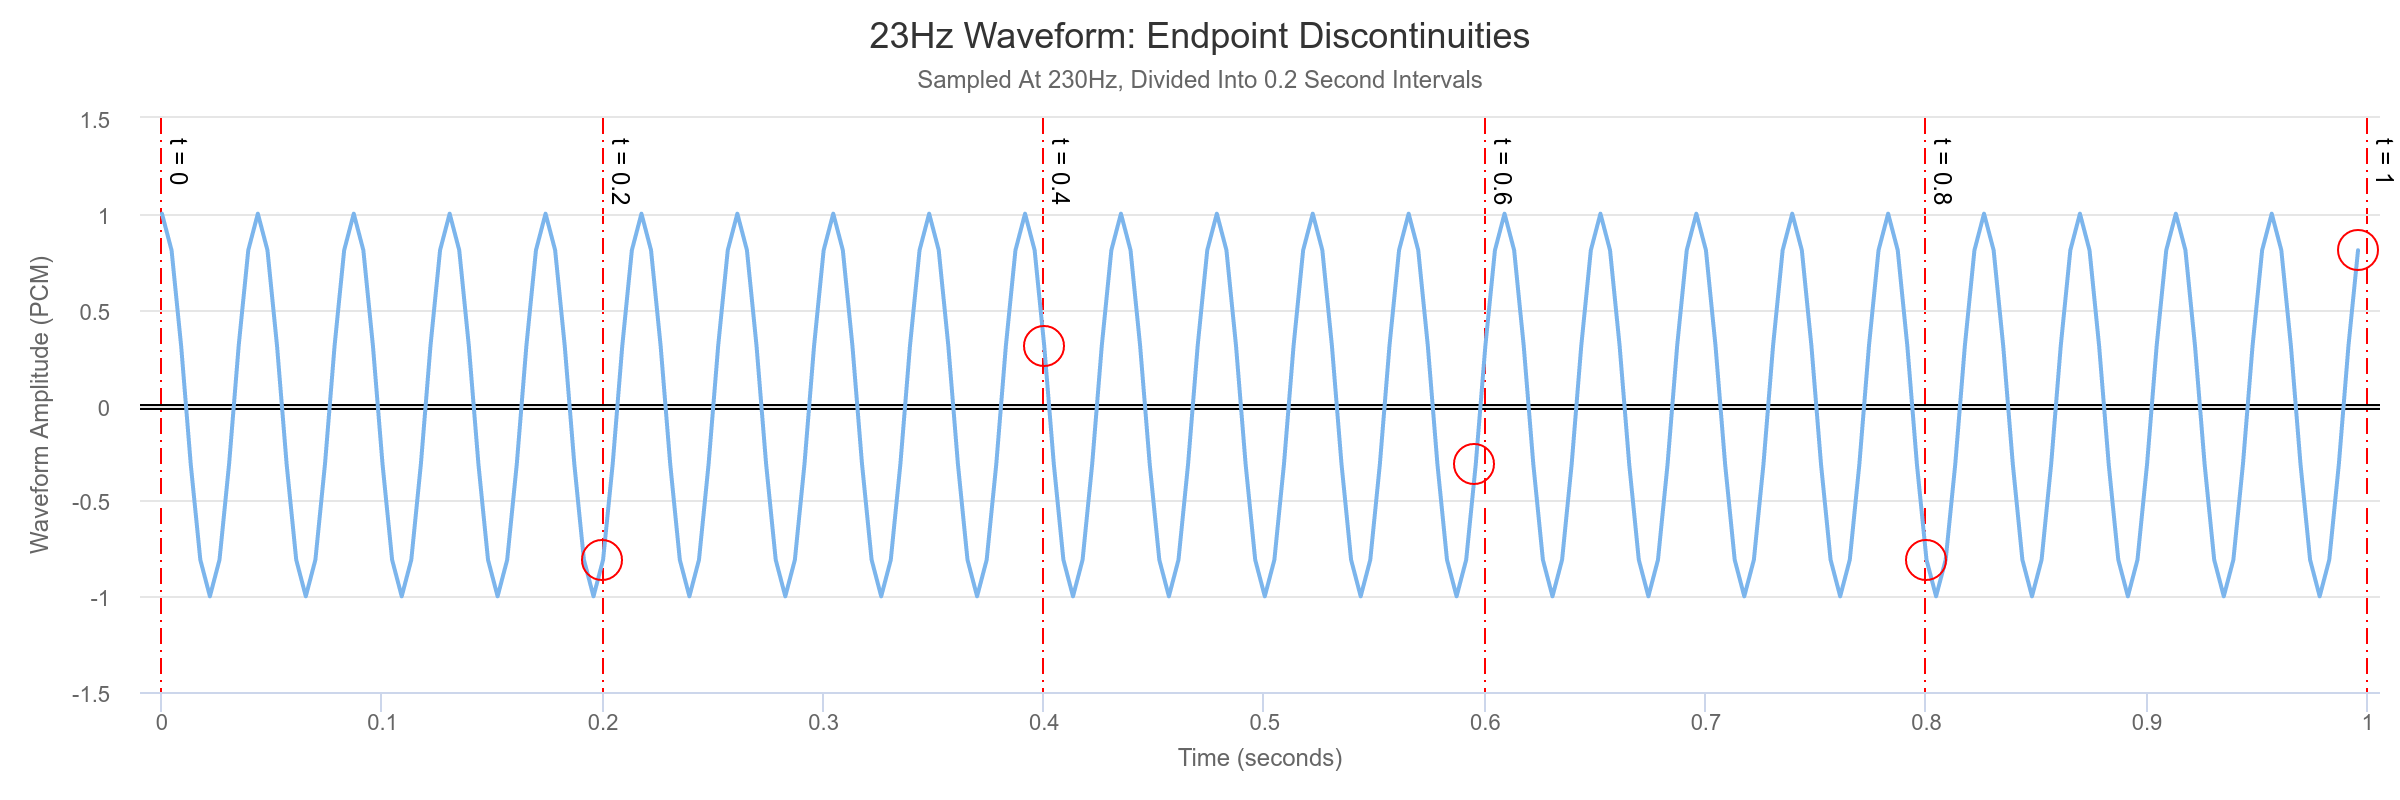 23hz Endpoint Discontinuities